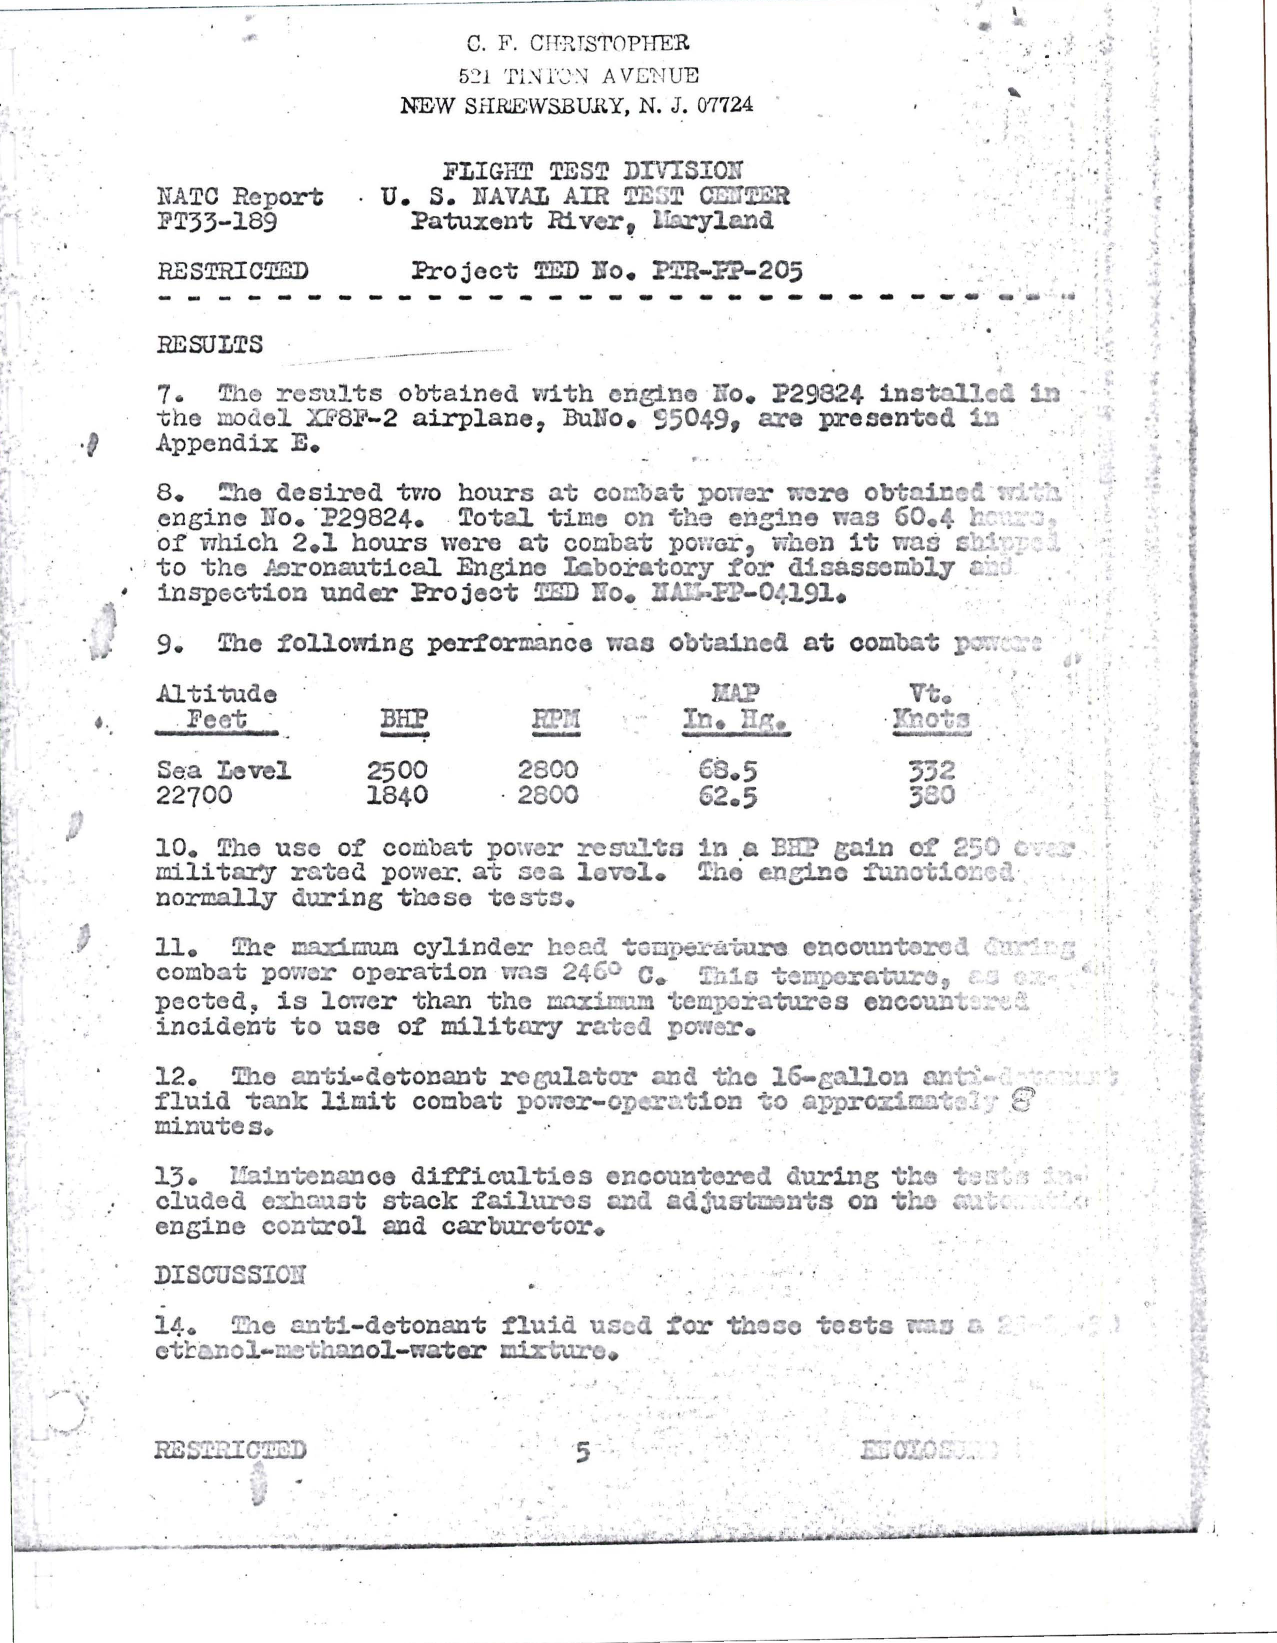 Sample page 7 from AirCorps Library document: Final Report on Combat Power Evaluation on F8F-2